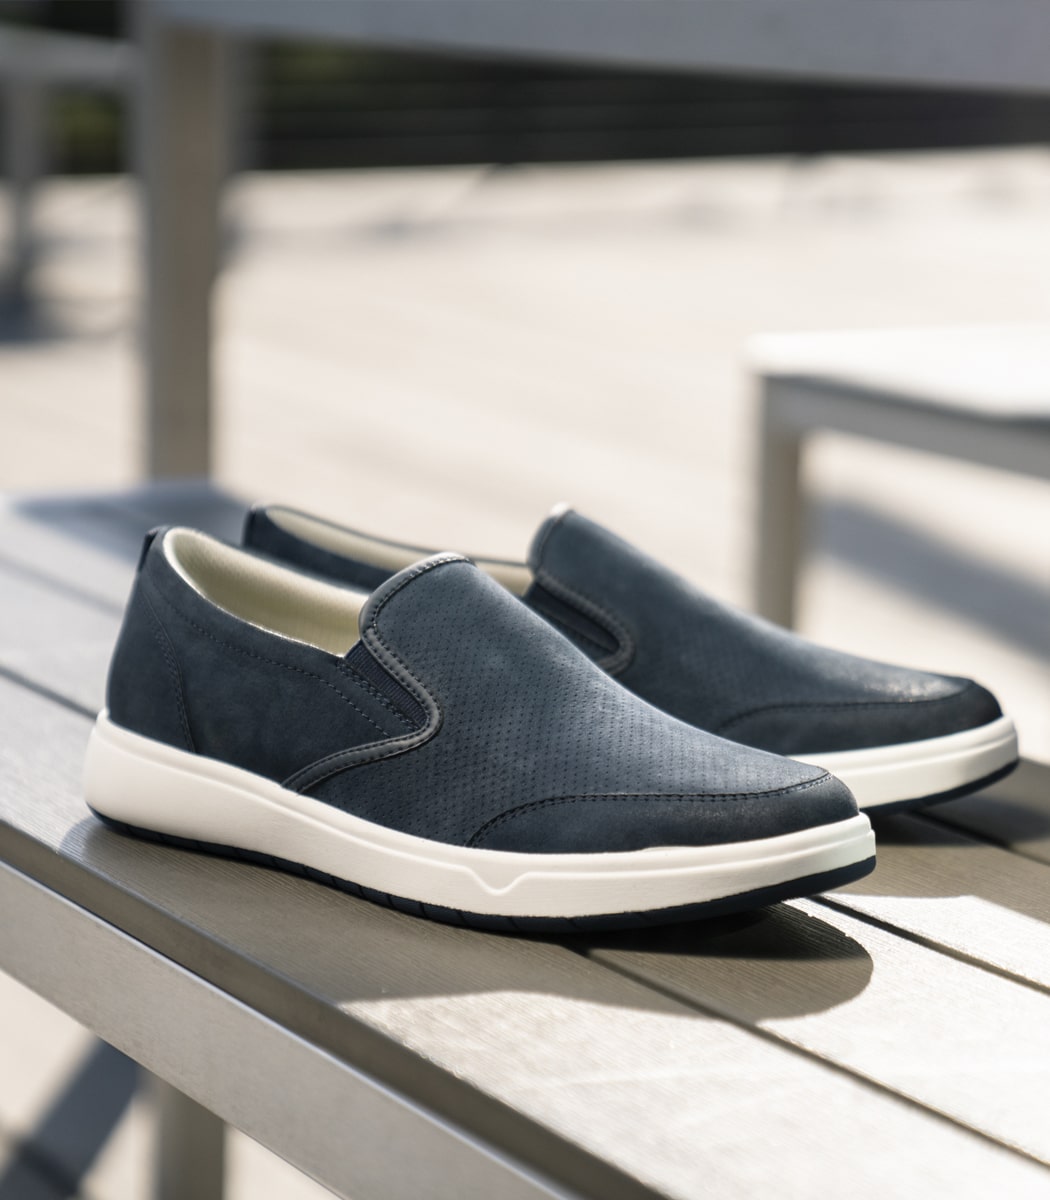 The featured product is the Premier Plain Toe Slip On Sneaker in Navy.